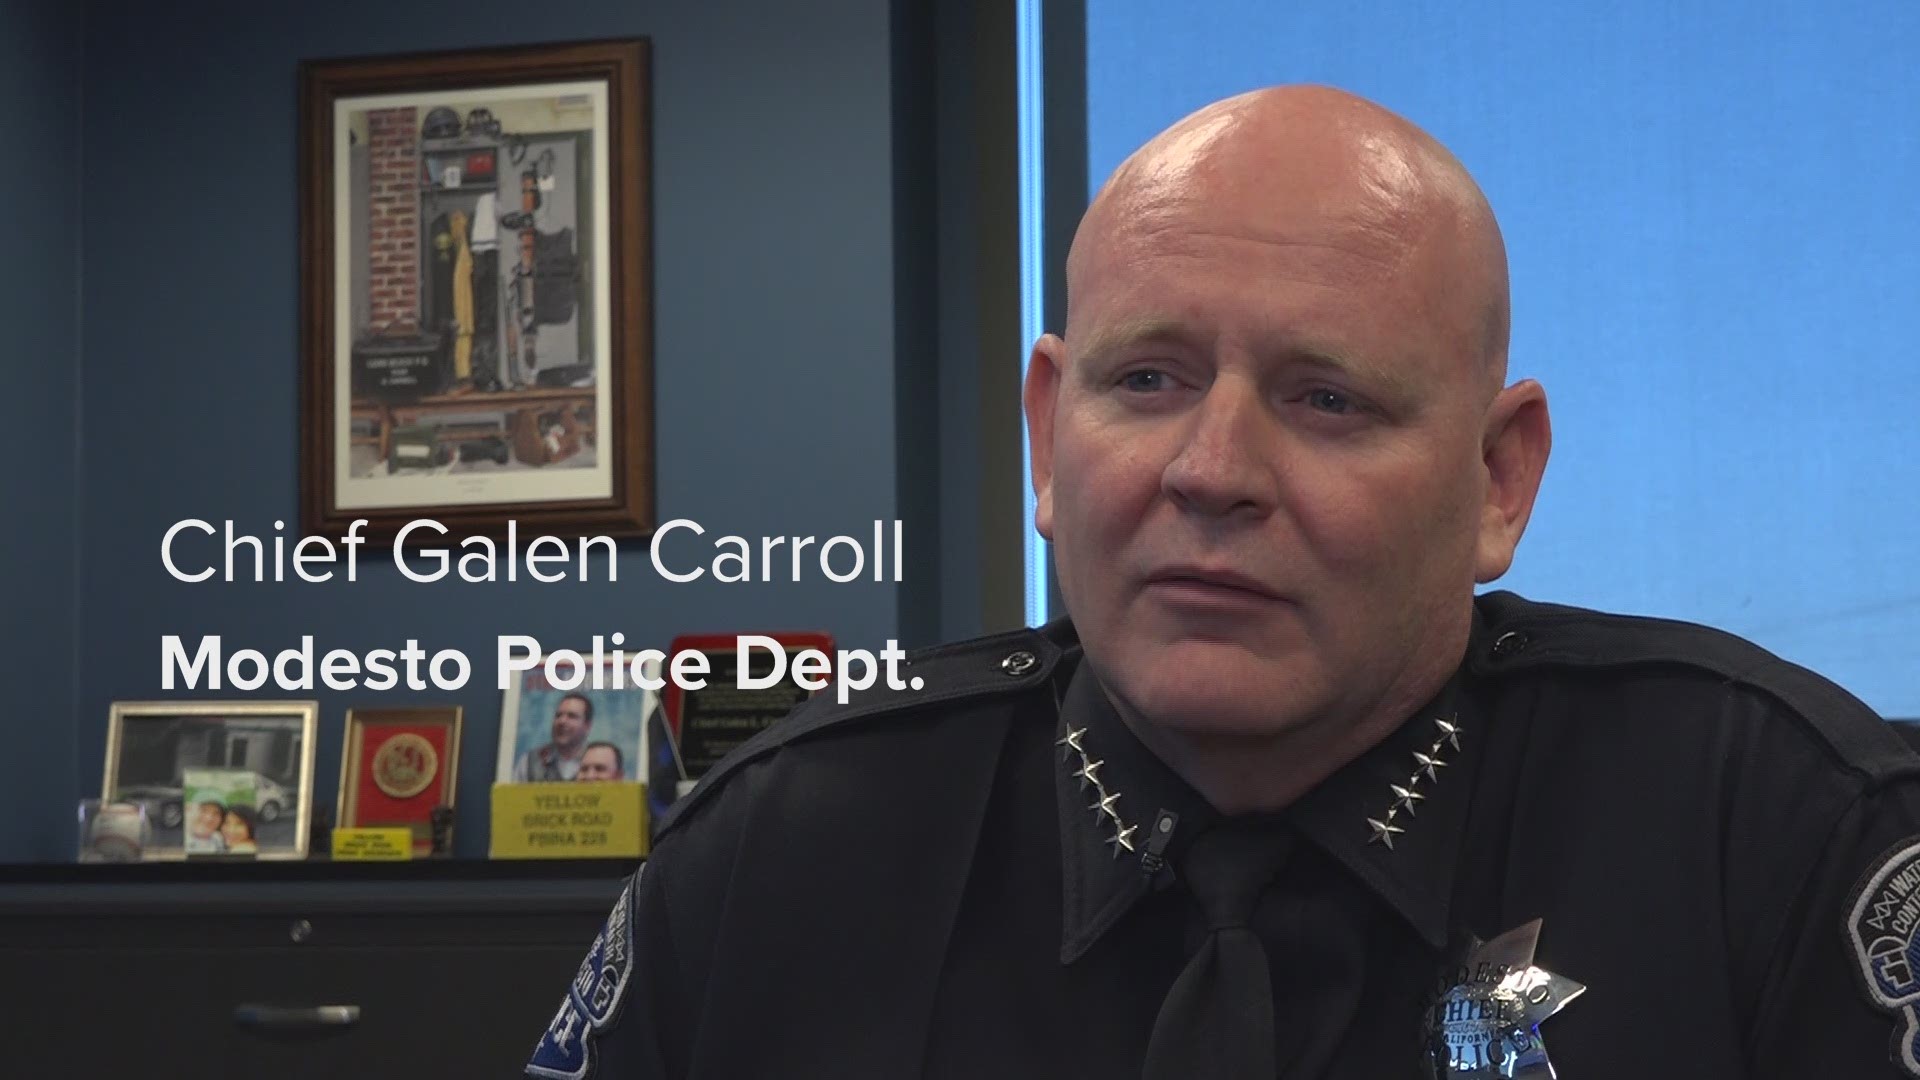 Chief Galen Carroll of the Modesto Police Department talks about pursuit protocols and describes the moments that led up to a stolen vehicle's crash that killed two innocent men near a taco truck.